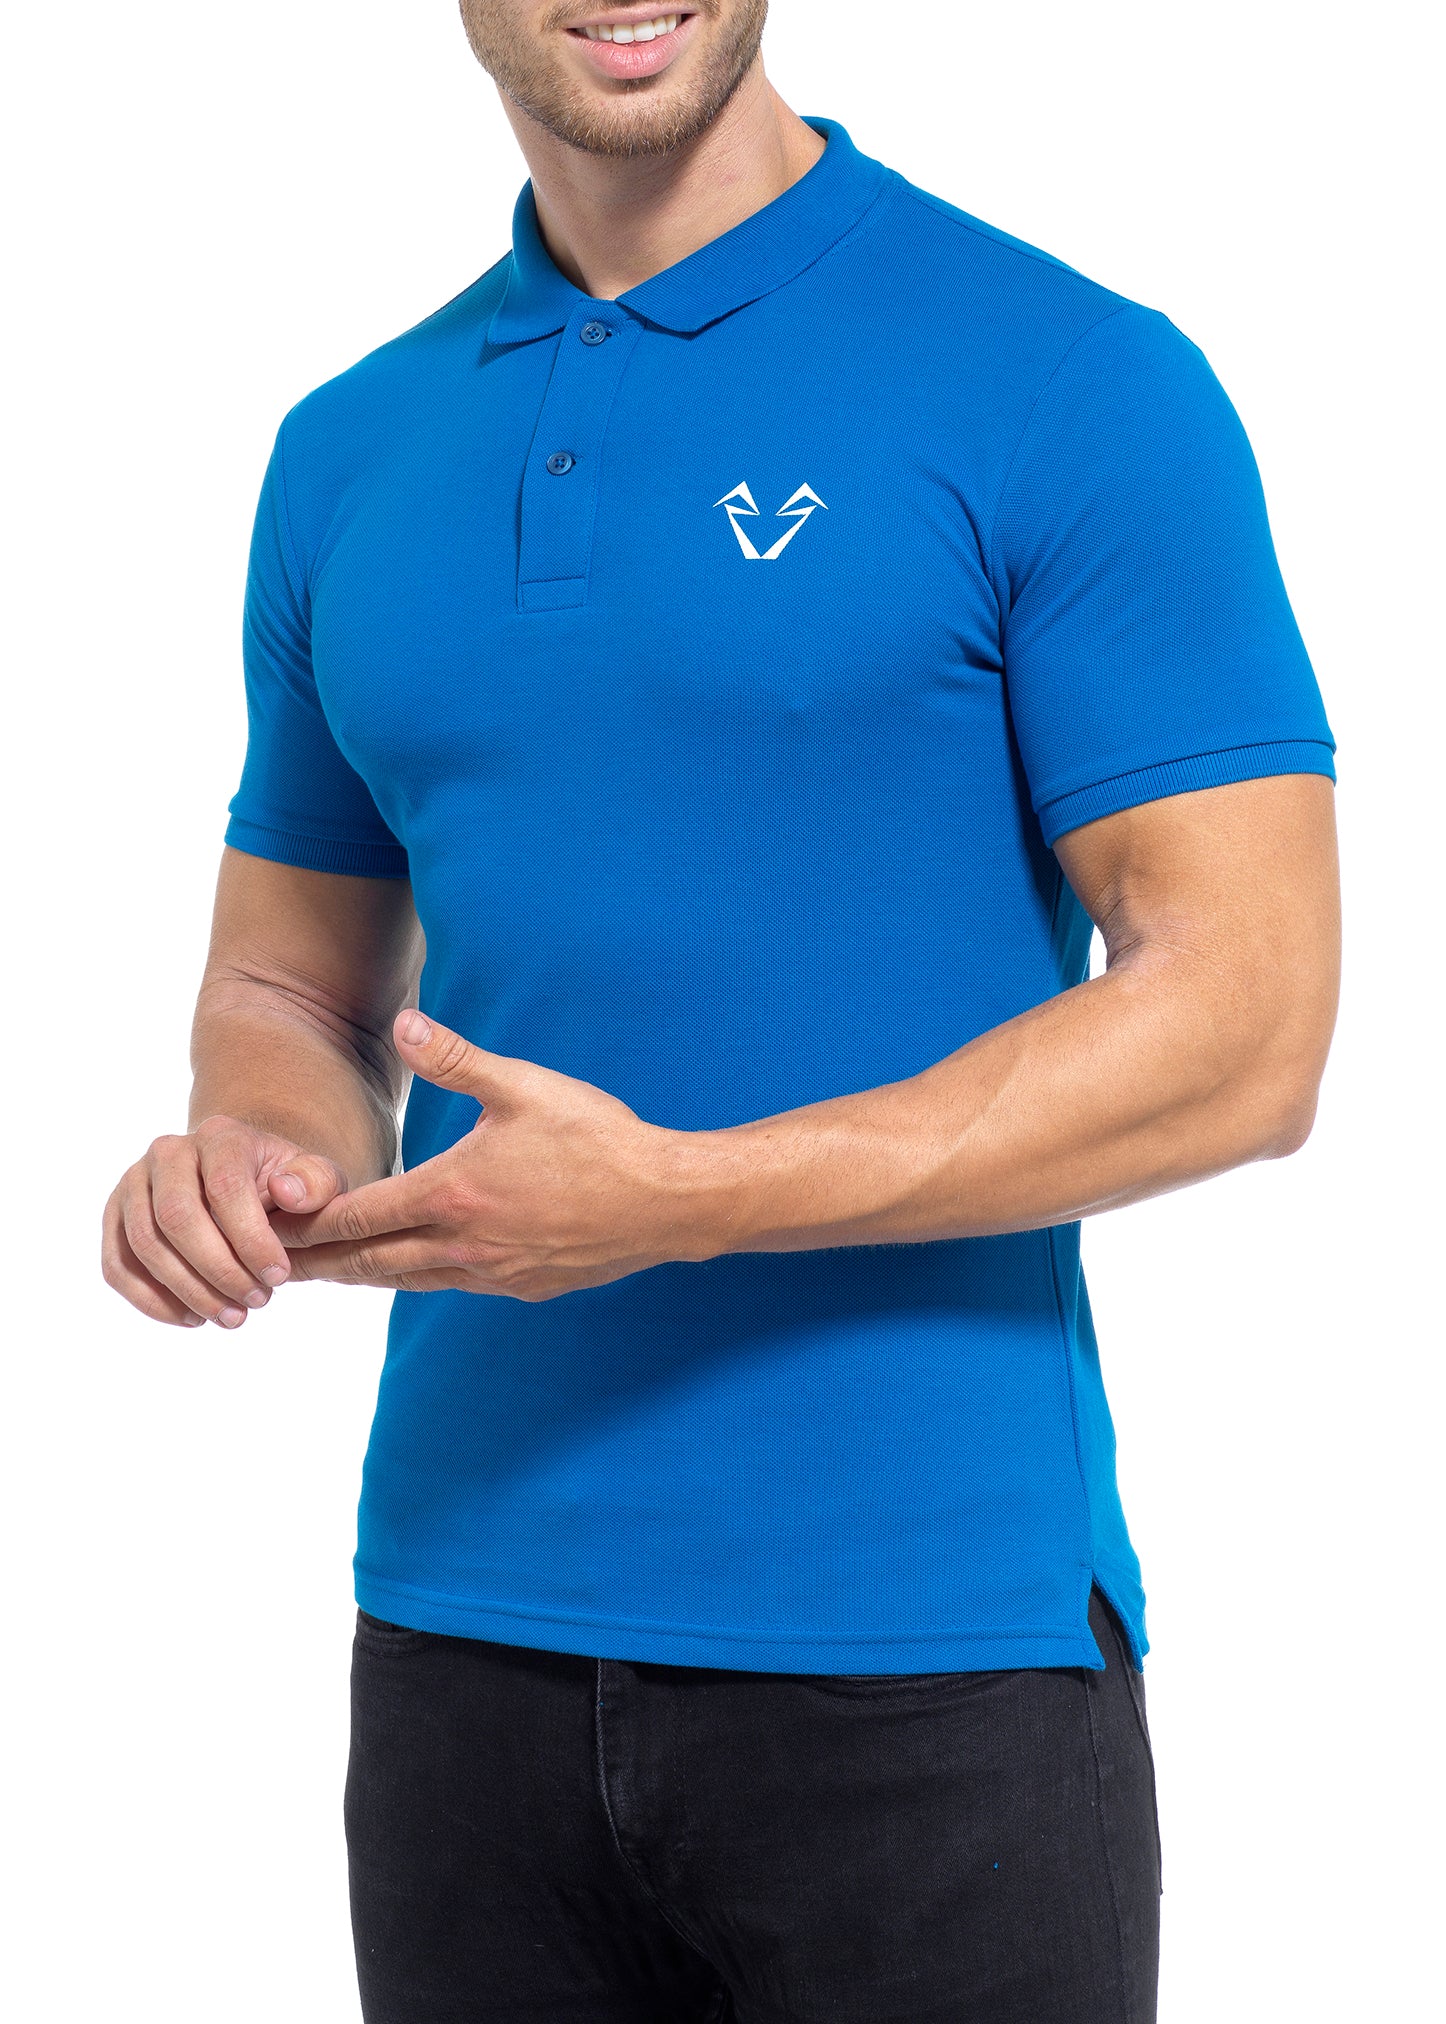 Mens Muscle Fit Shirts